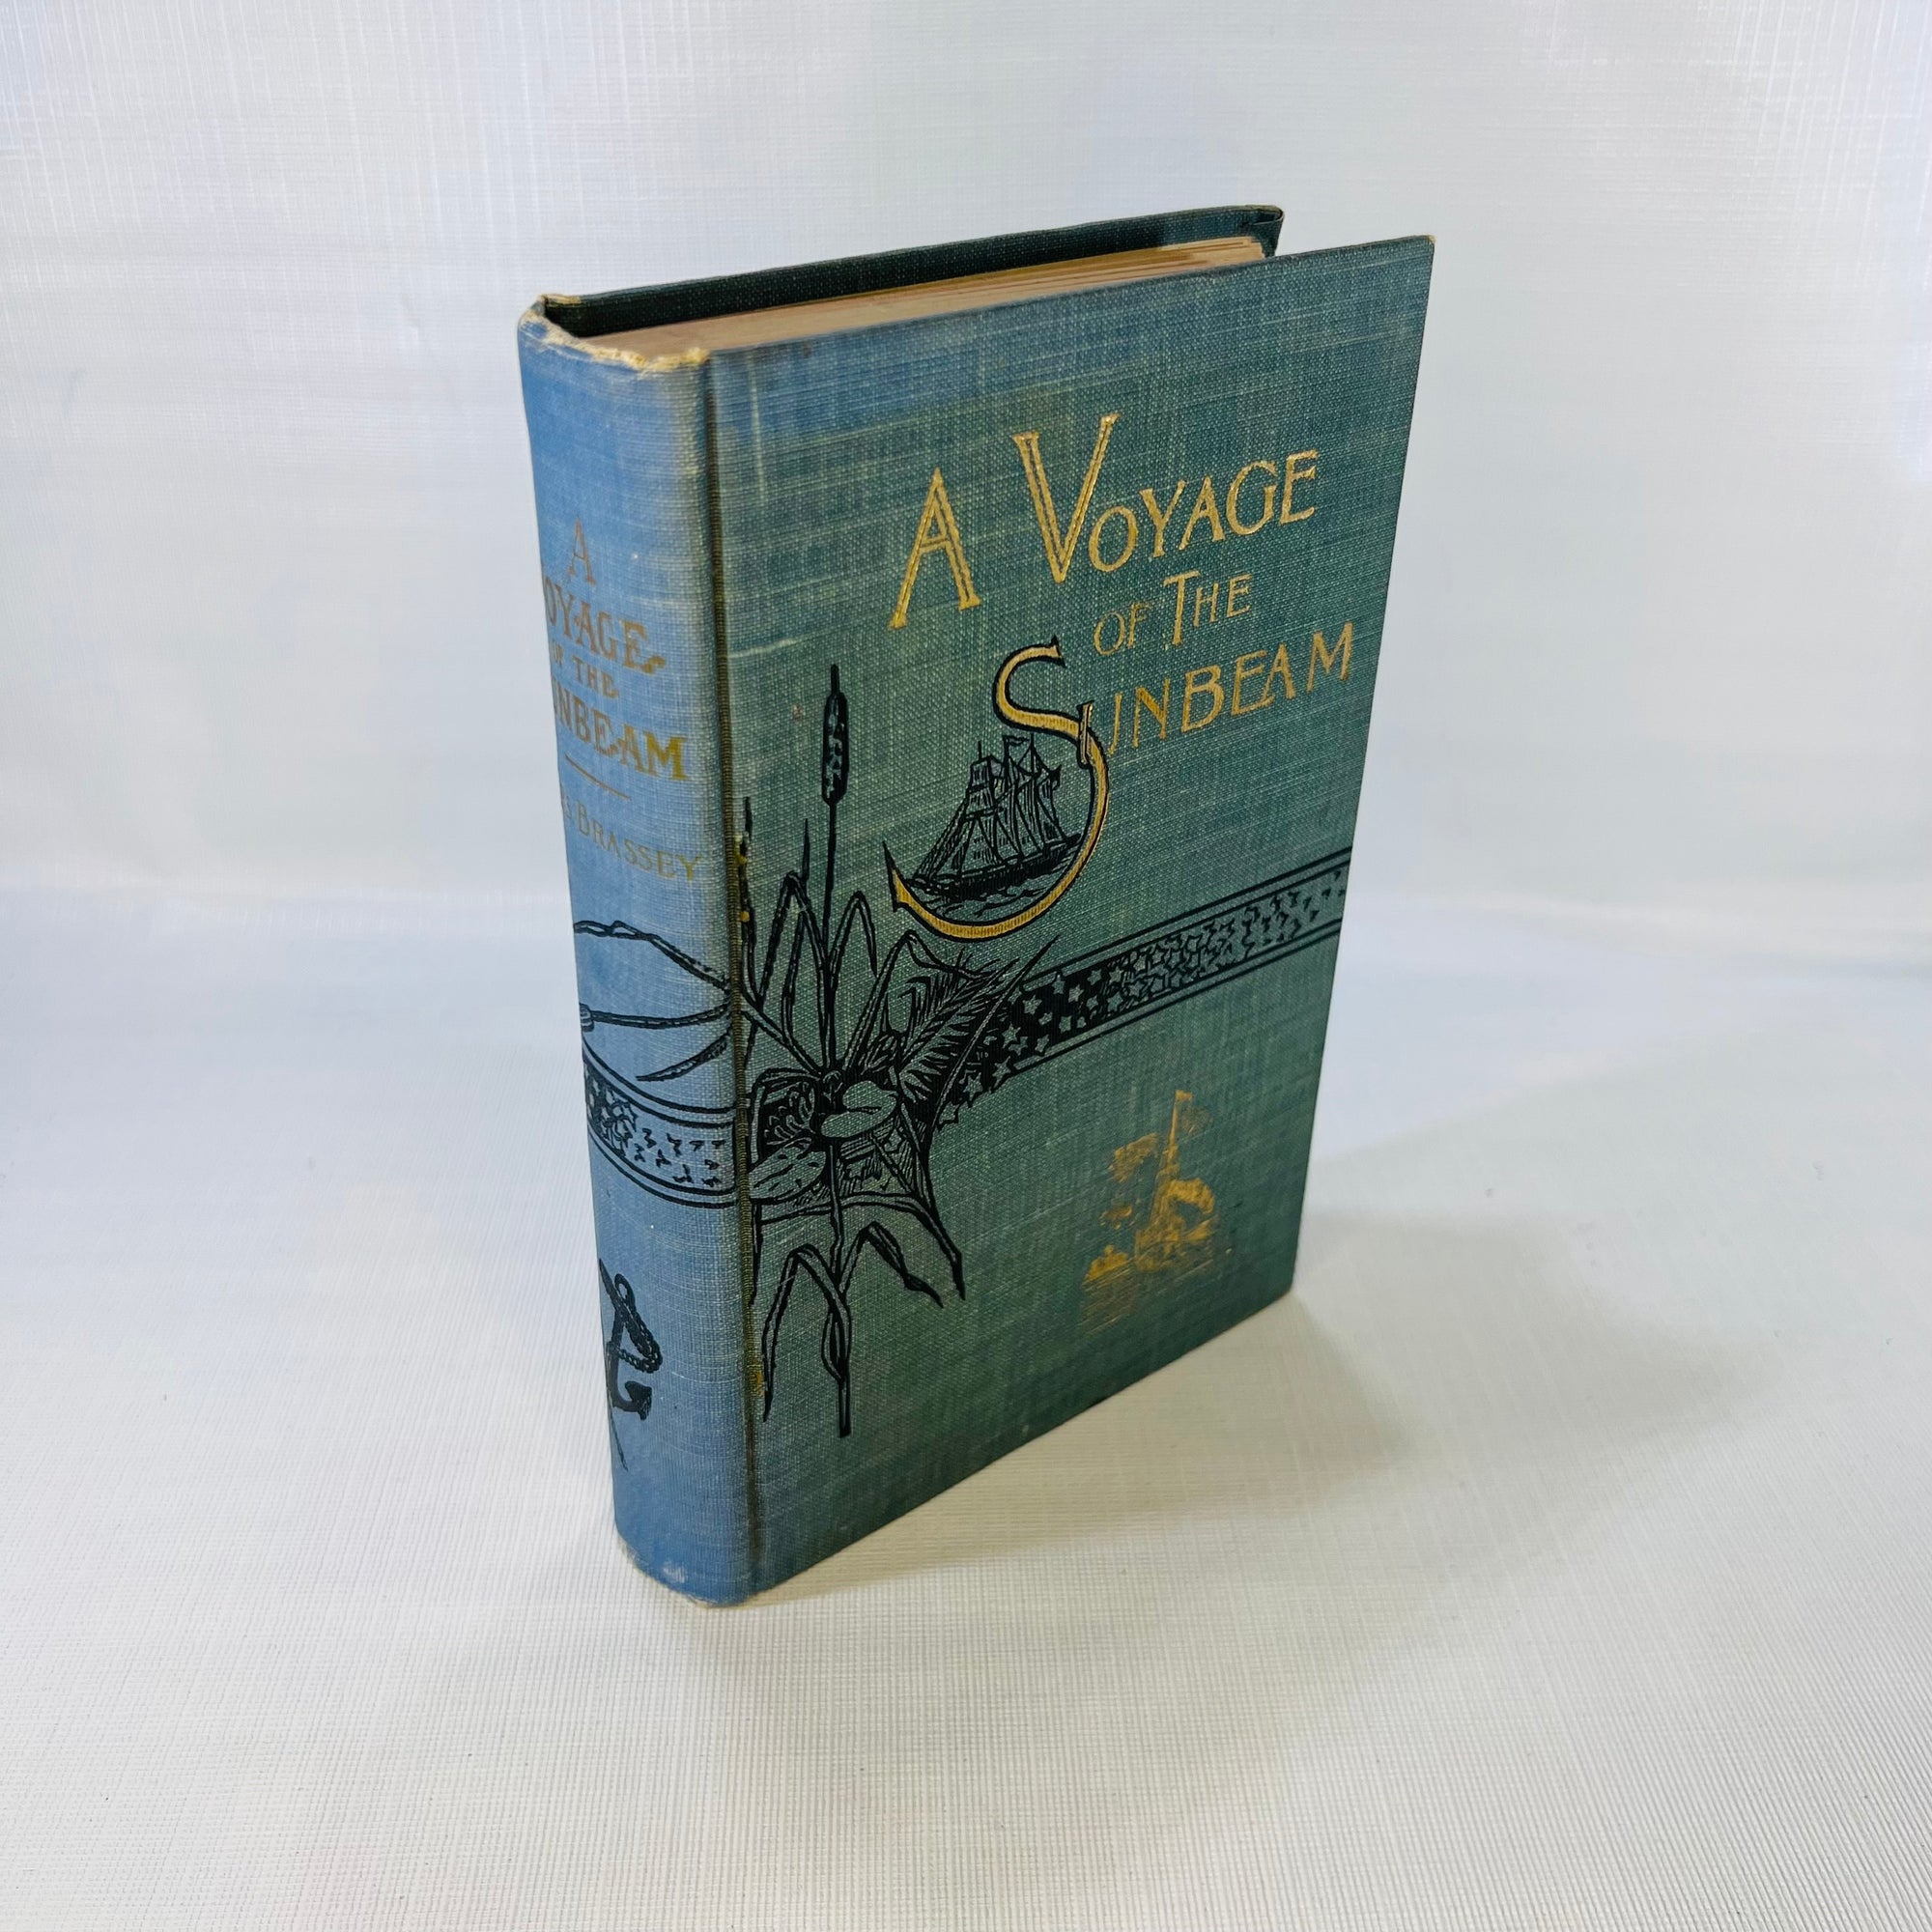 A Voyage of The Sunbeam Our Home on the Ocean for Eleven Month by Lady Brassey Profusely Illustrated No Publishing Date Found Homewood Publishing Company